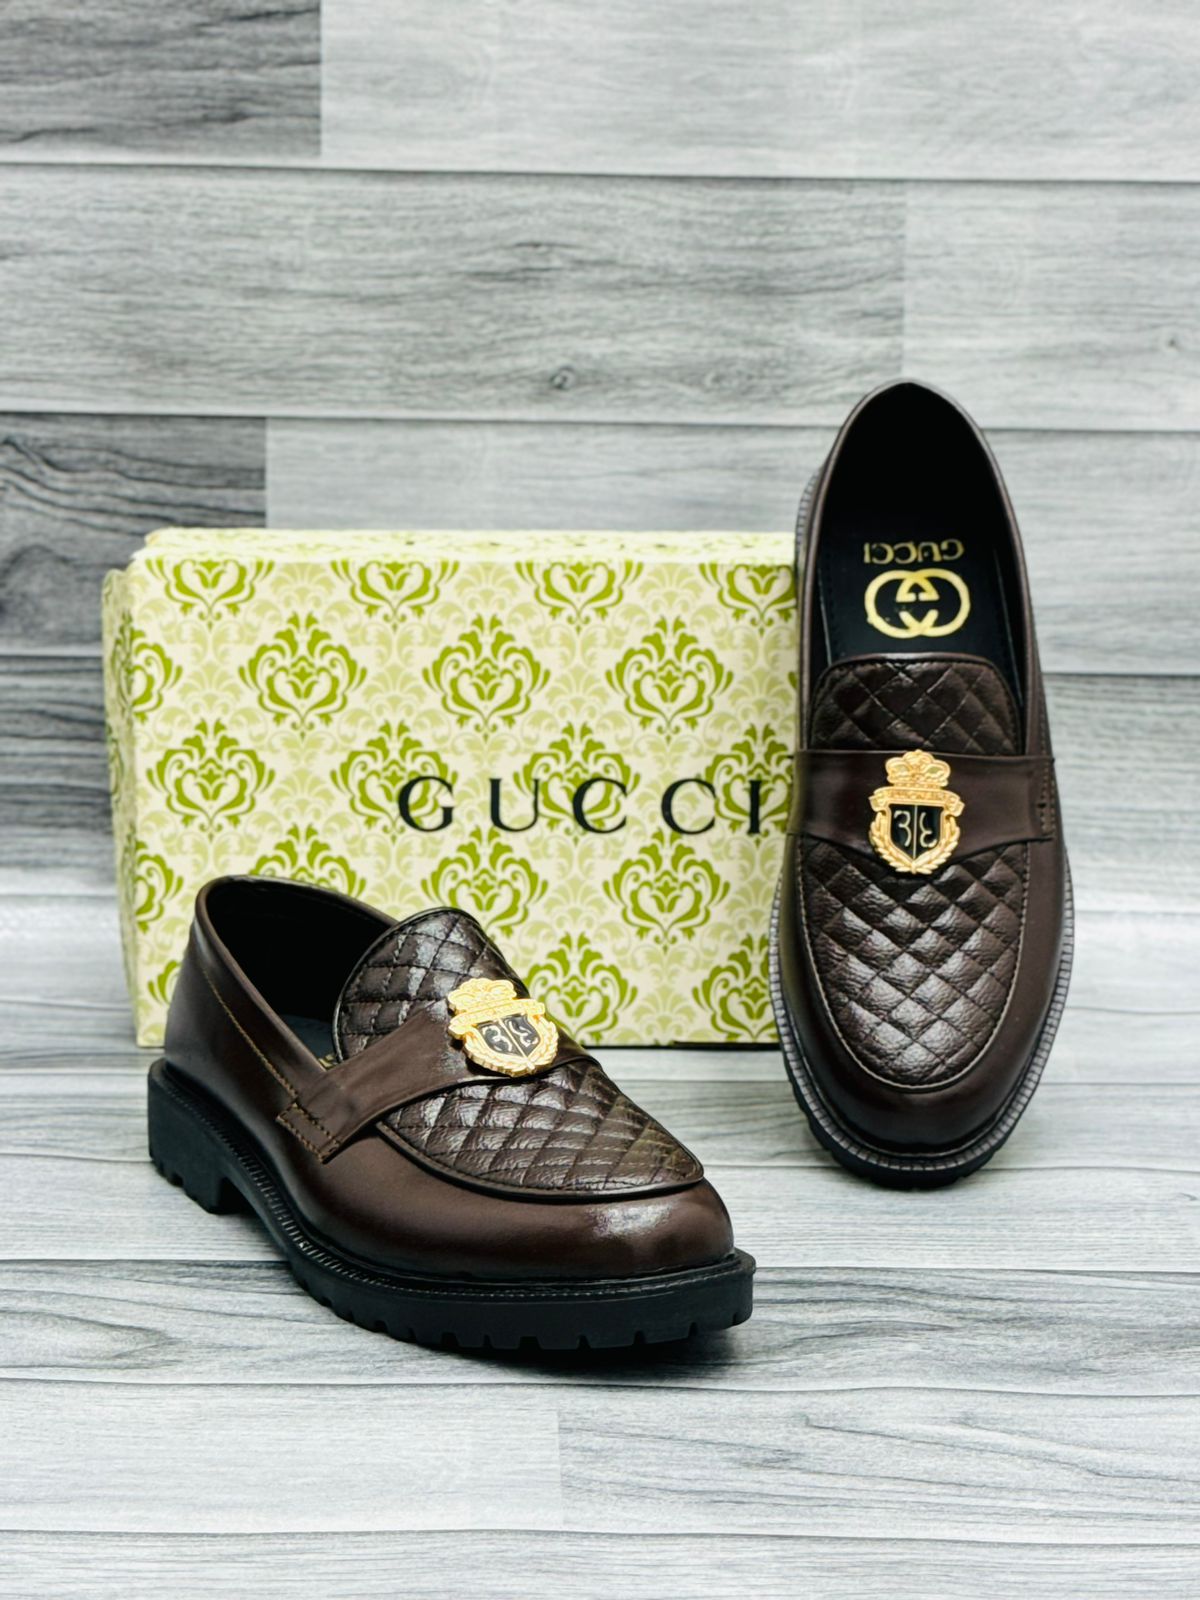 Guccci - Formal D13 - Brown